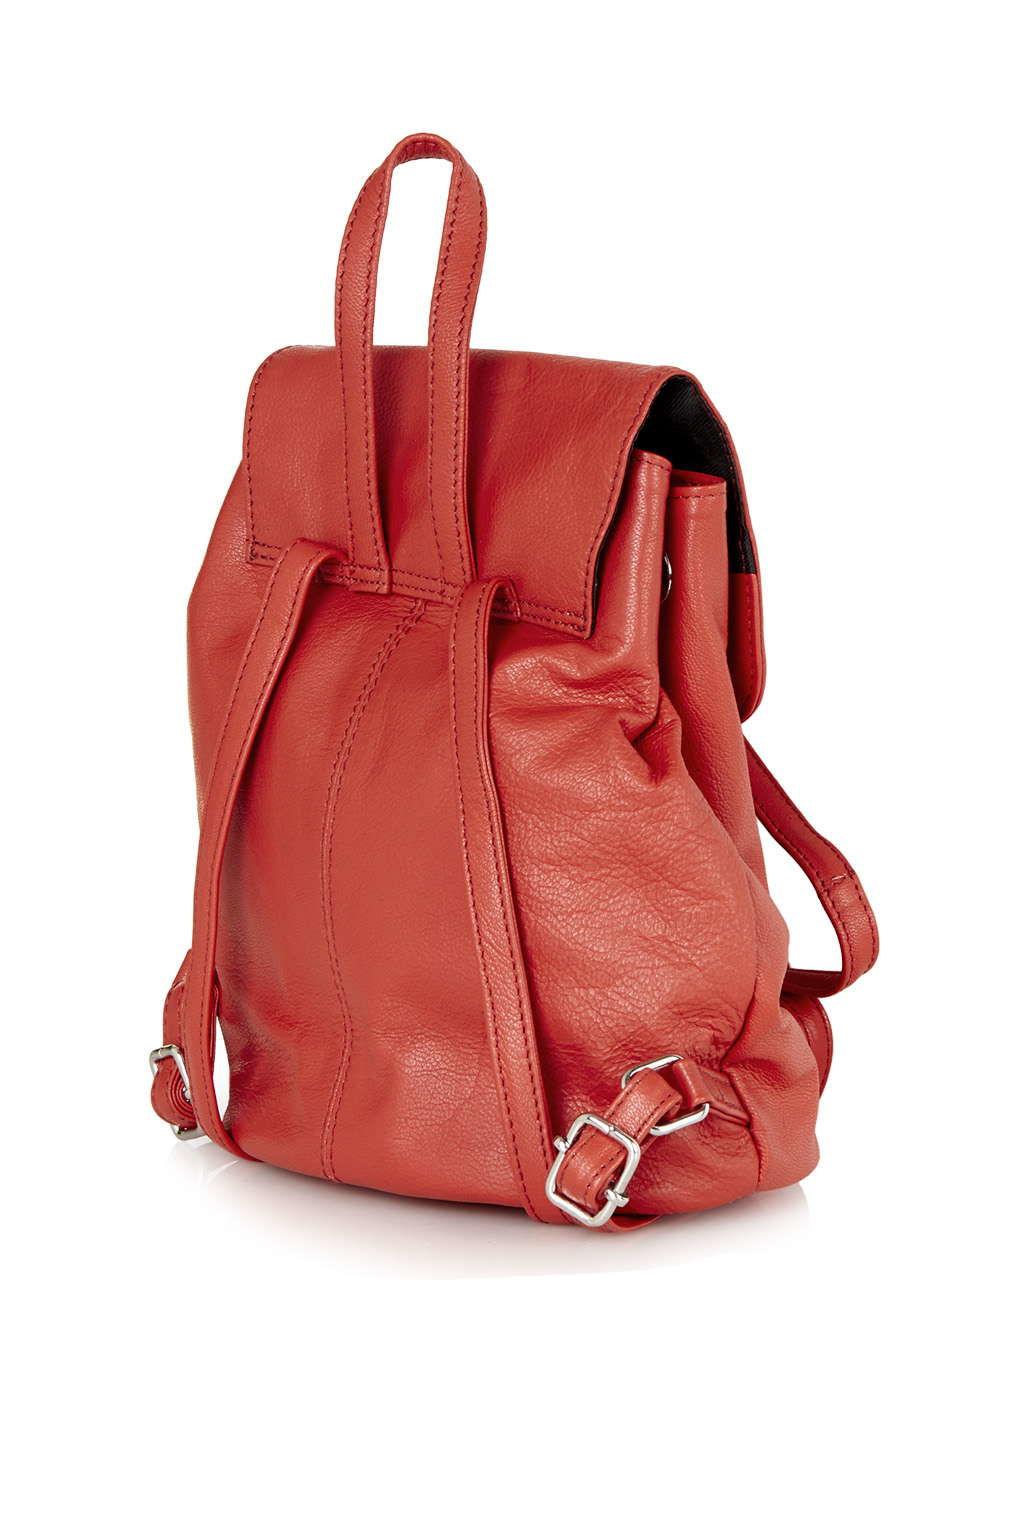 Topshop Mini Leather Backpack in Red | Lyst